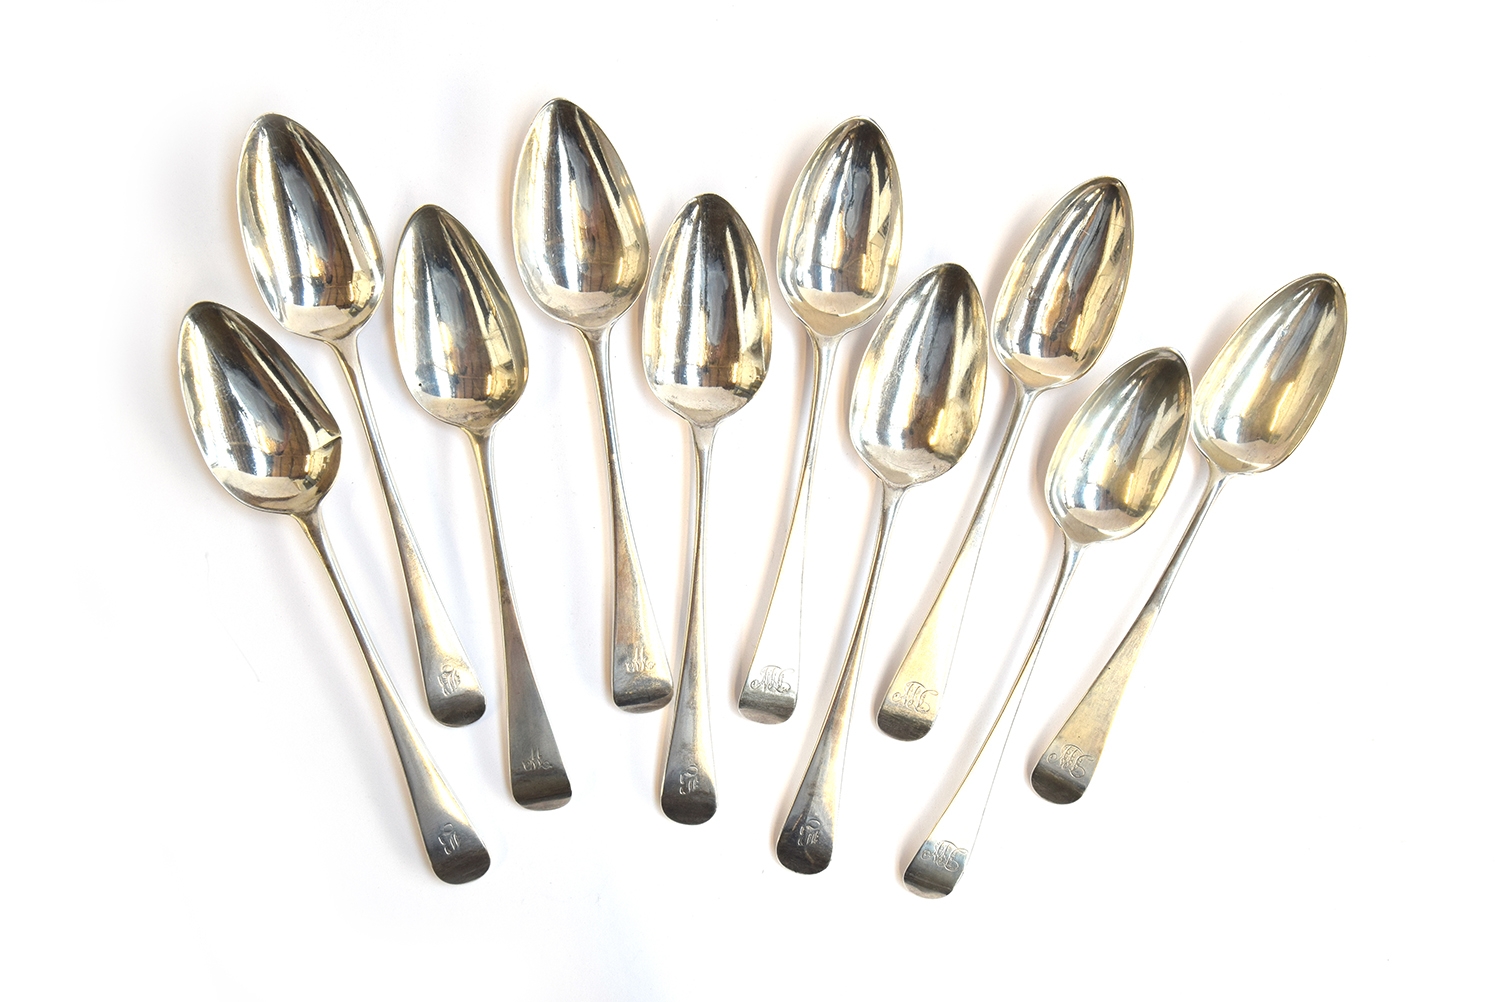 Ten George III Old English pattern table spoons, six by William Bateman I (1815 and 1824), the